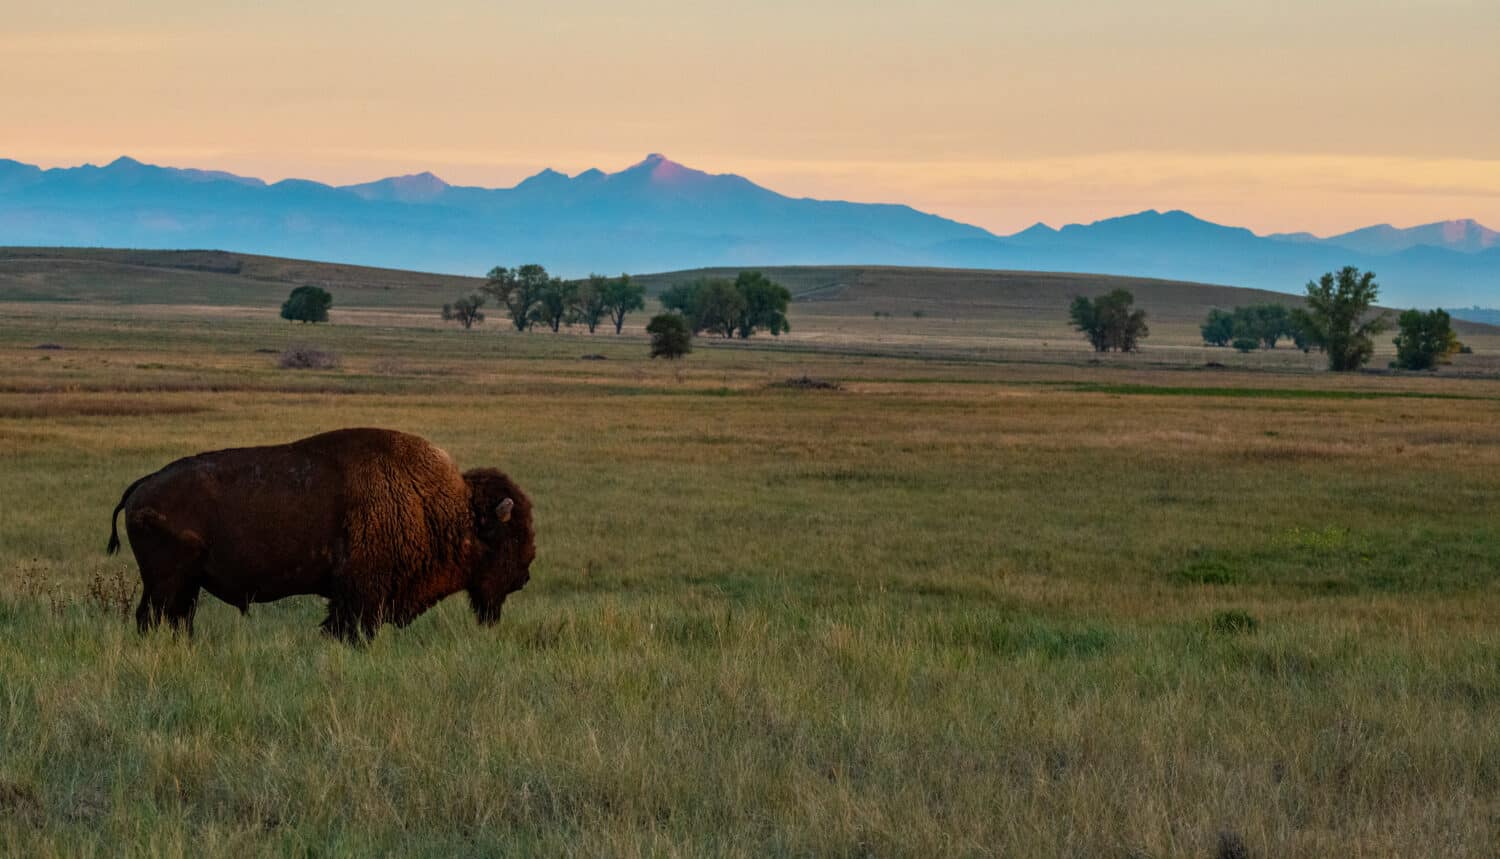 Bison in the Morning Light on the Colorado Plains